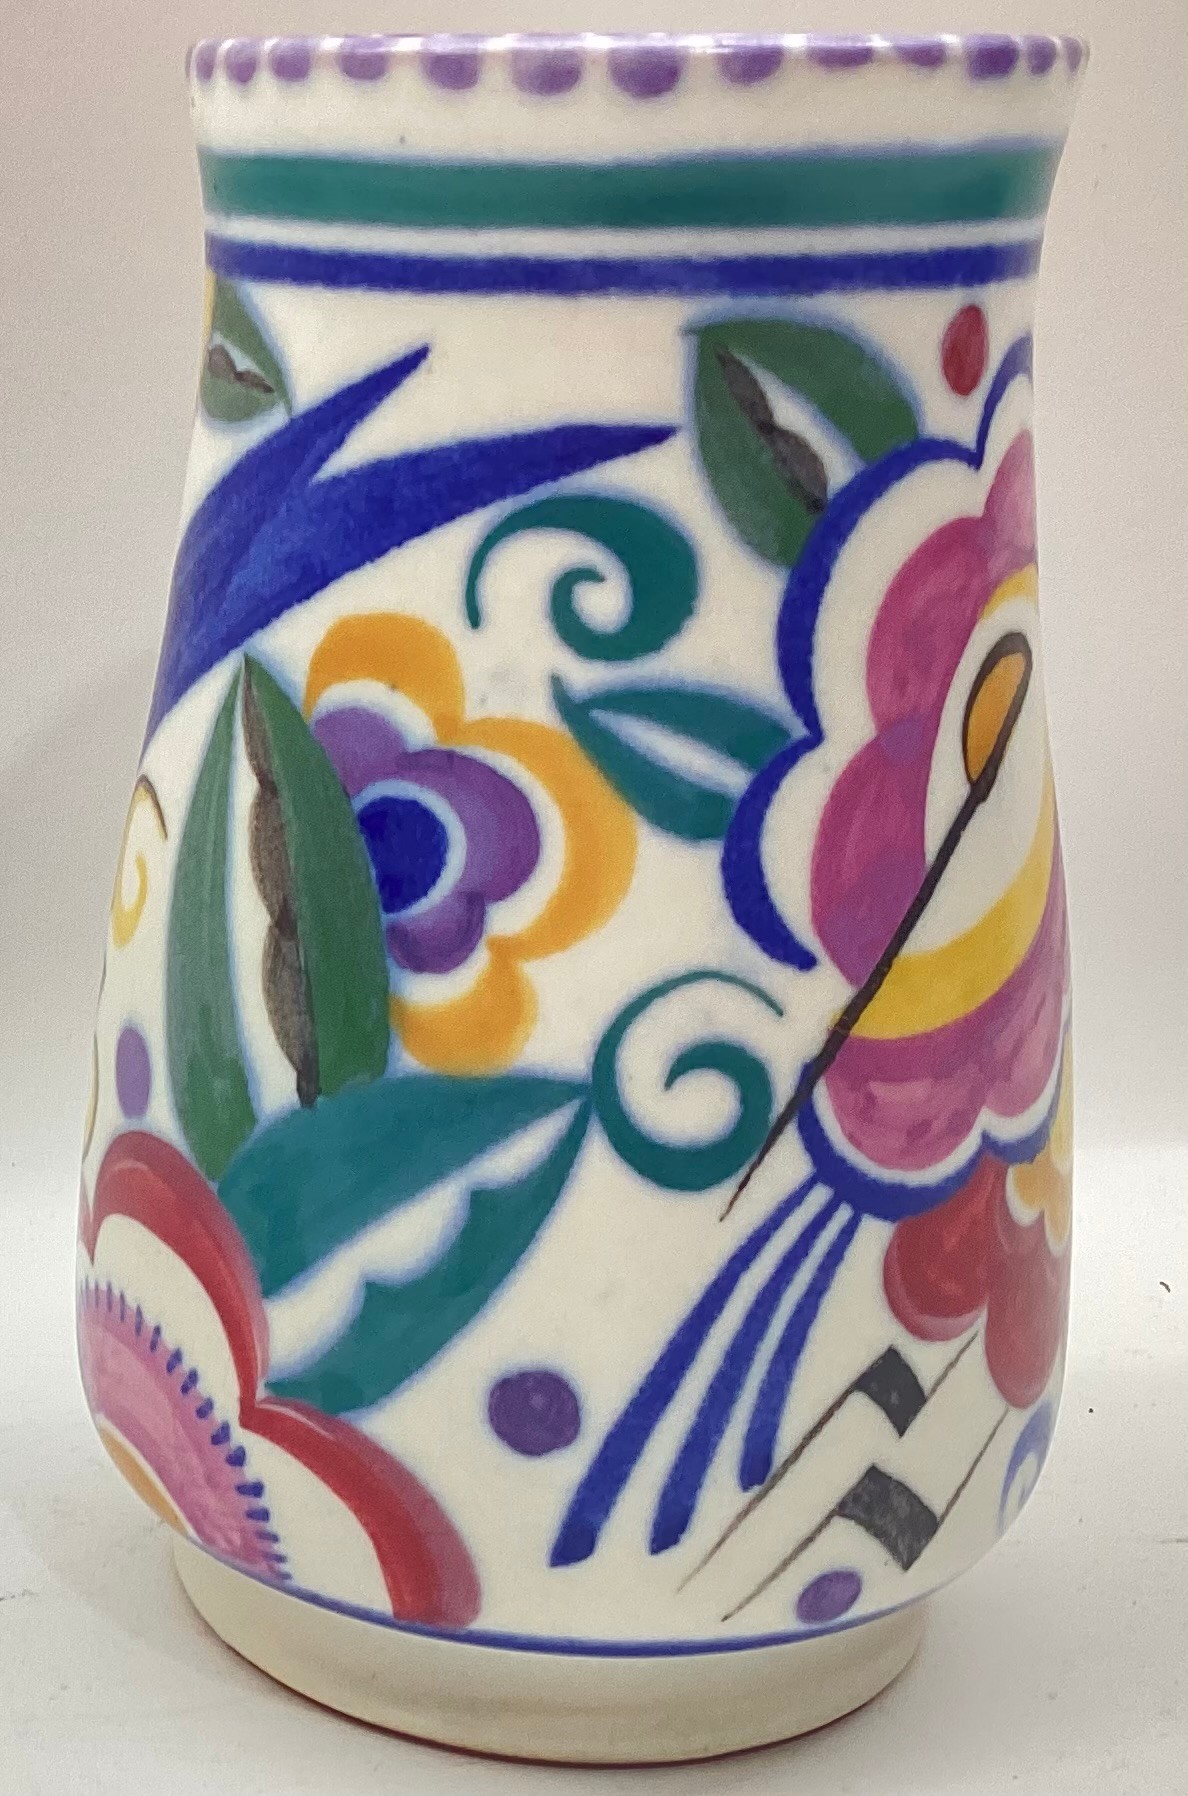 Poole Pottery shape 204 SN pattern vase decorated with blue & purple bird 6" high. - Image 2 of 4